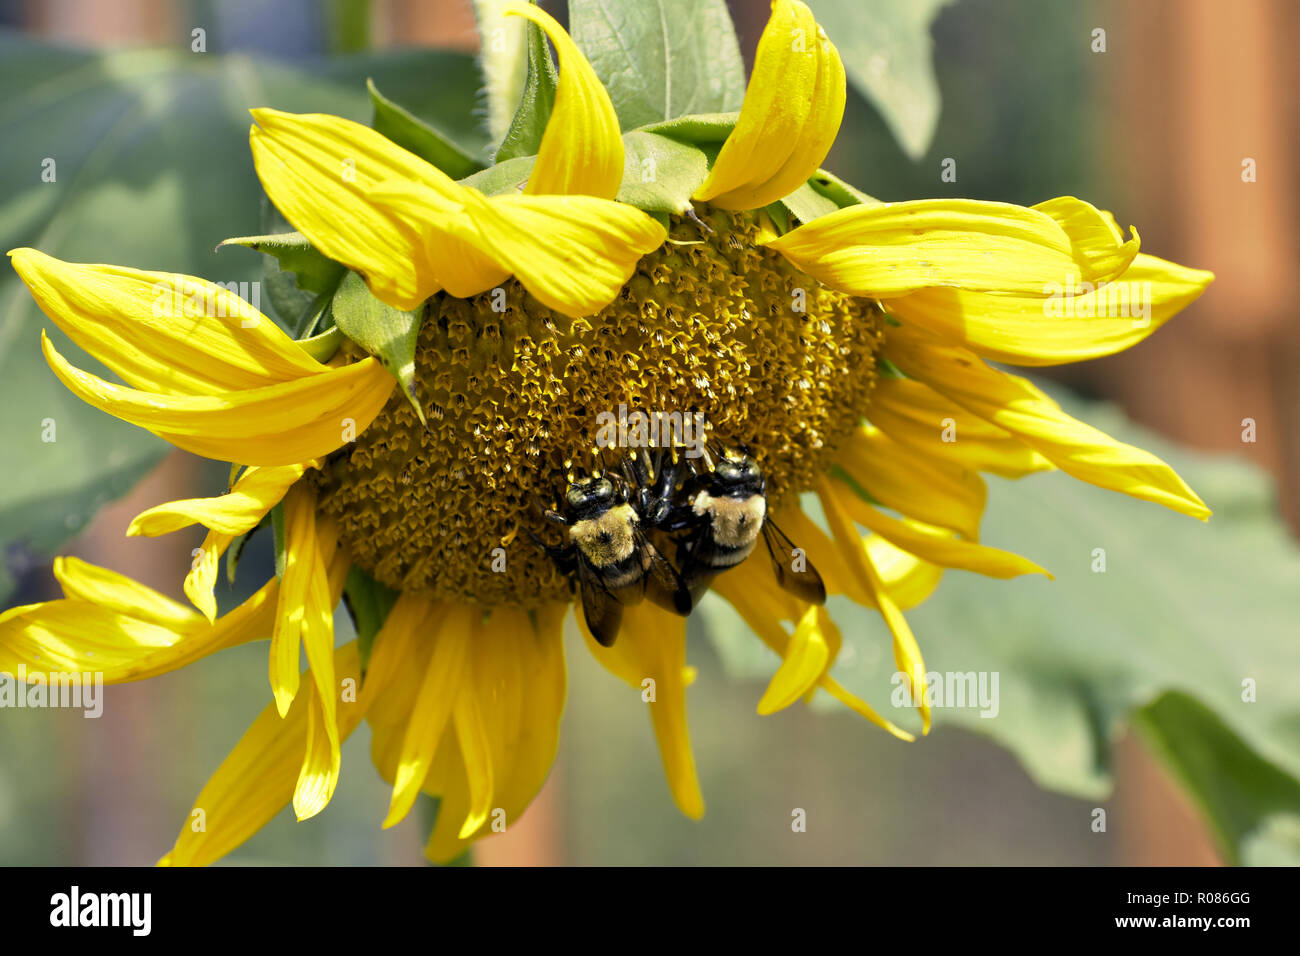 Closeup of a large yellow sunflower growing in a community garden with two carpenter bees collecting pollen, green leaves visible in the background Stock Photo